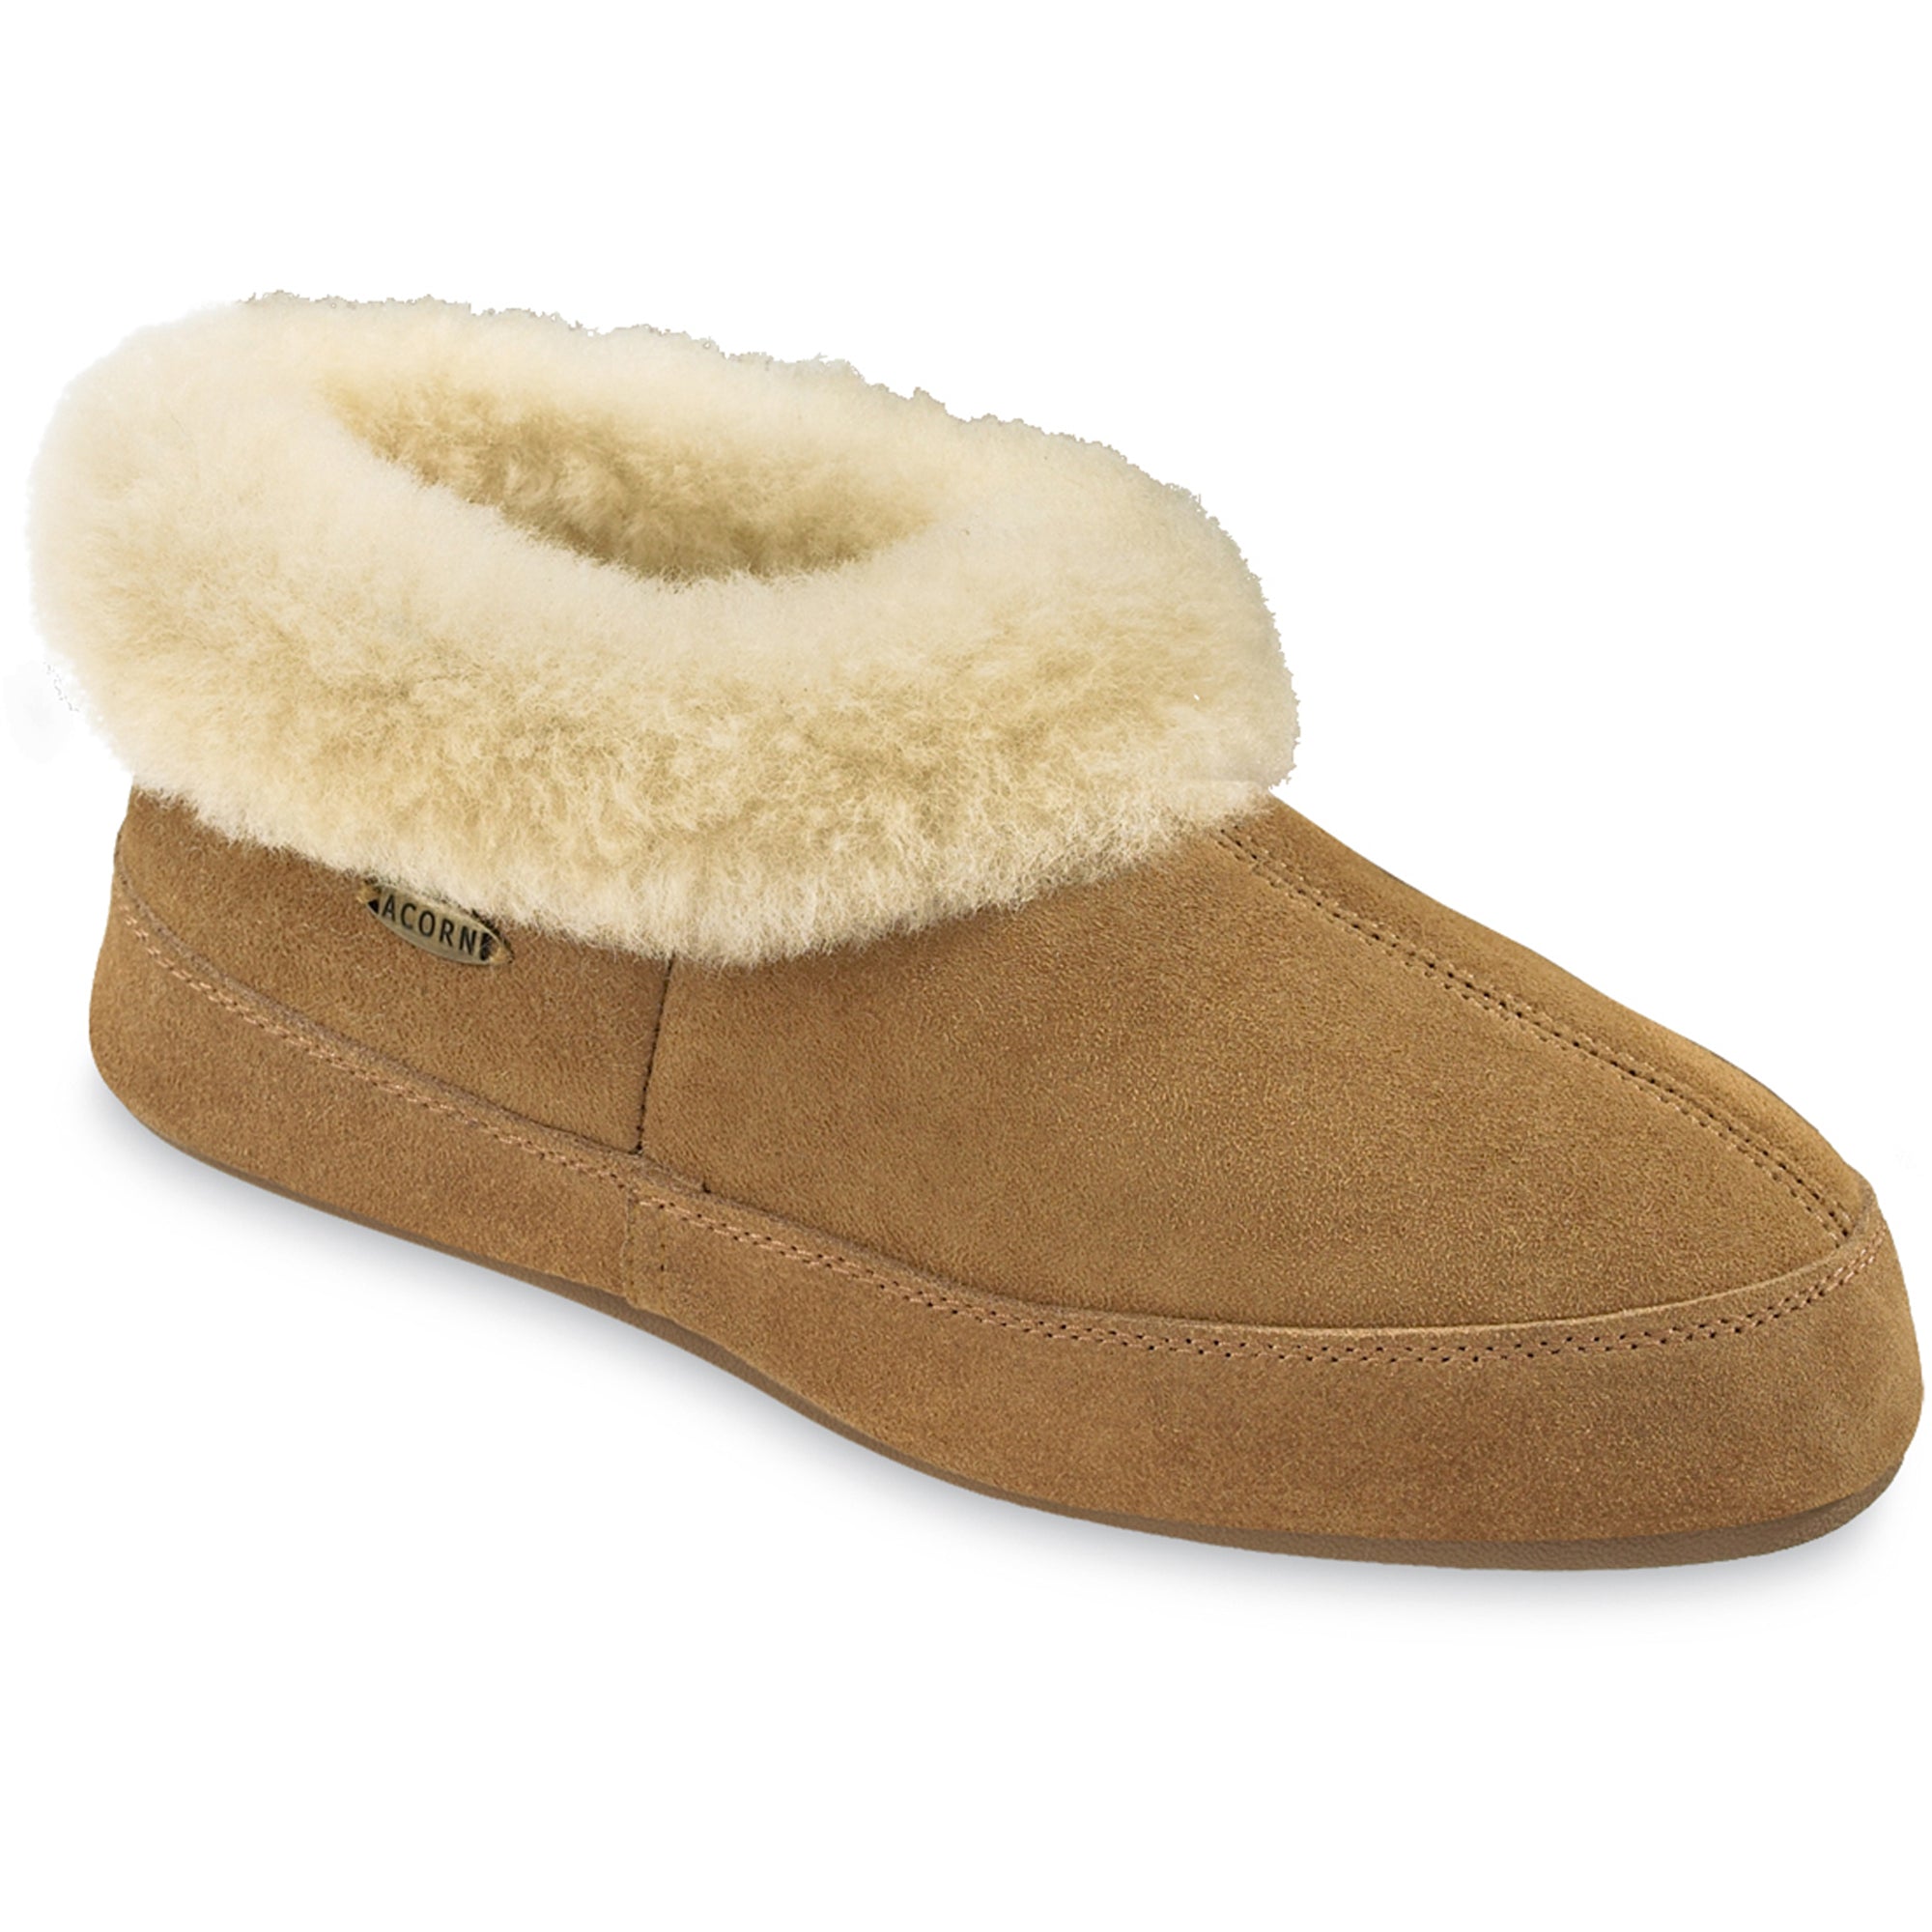 Women's Oh Ewe Boot Slippers in Walnut Right Angled View